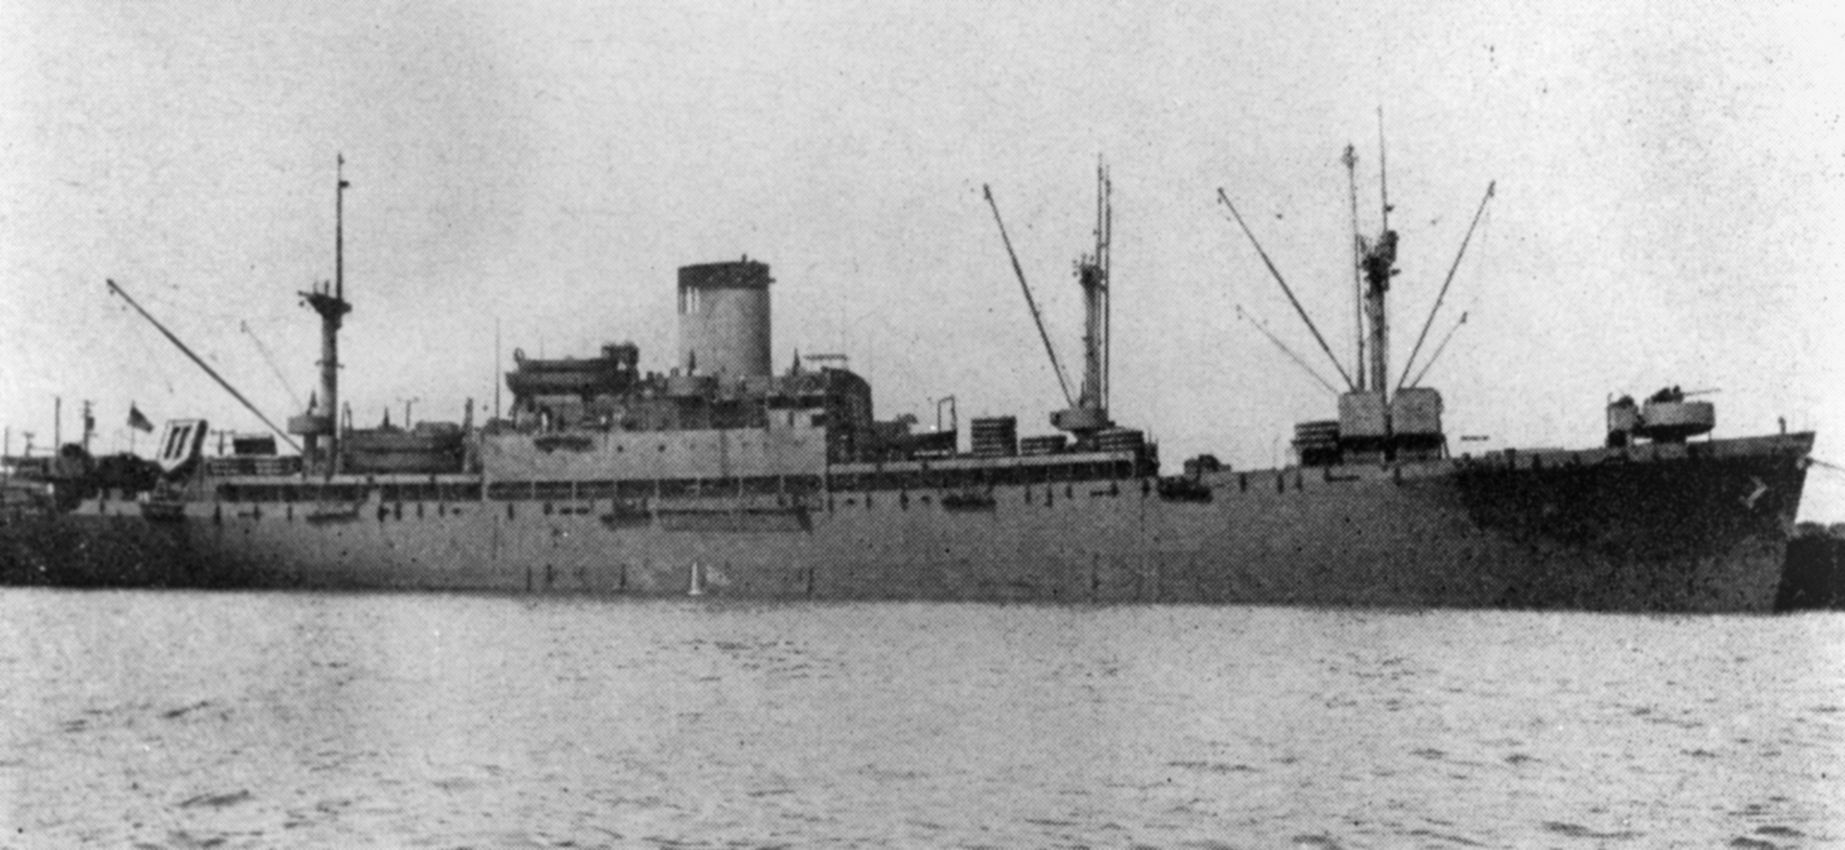 Shown while in port in 1943, the troopship SS Cape San Juan was to later meet a tragic fate, torpedoed by a Japanese submarine.  Survivors of the sinking were rescued after a harrowing ordeal.